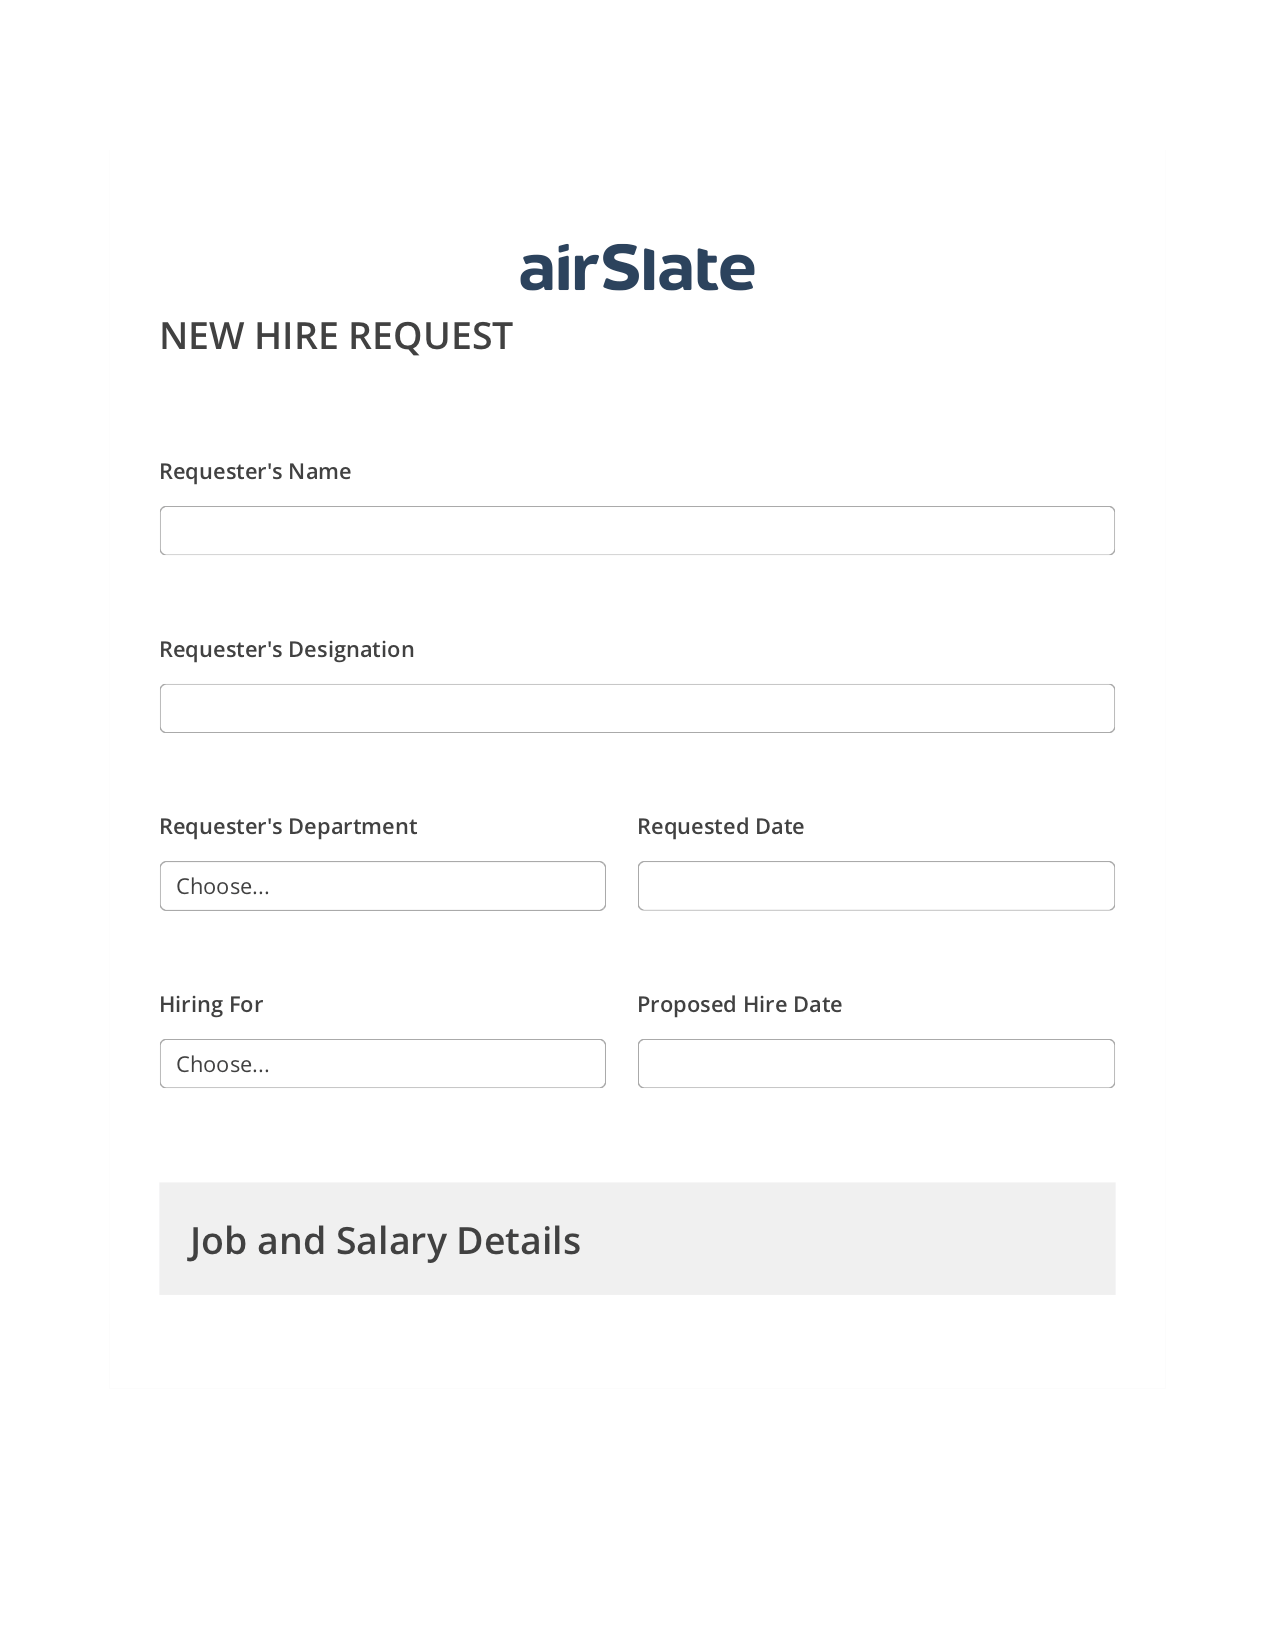 Hiring Request Workflow Pre-fill from CSV File Bot, SendGrid send Campaign bot, Export to NetSuite Bot